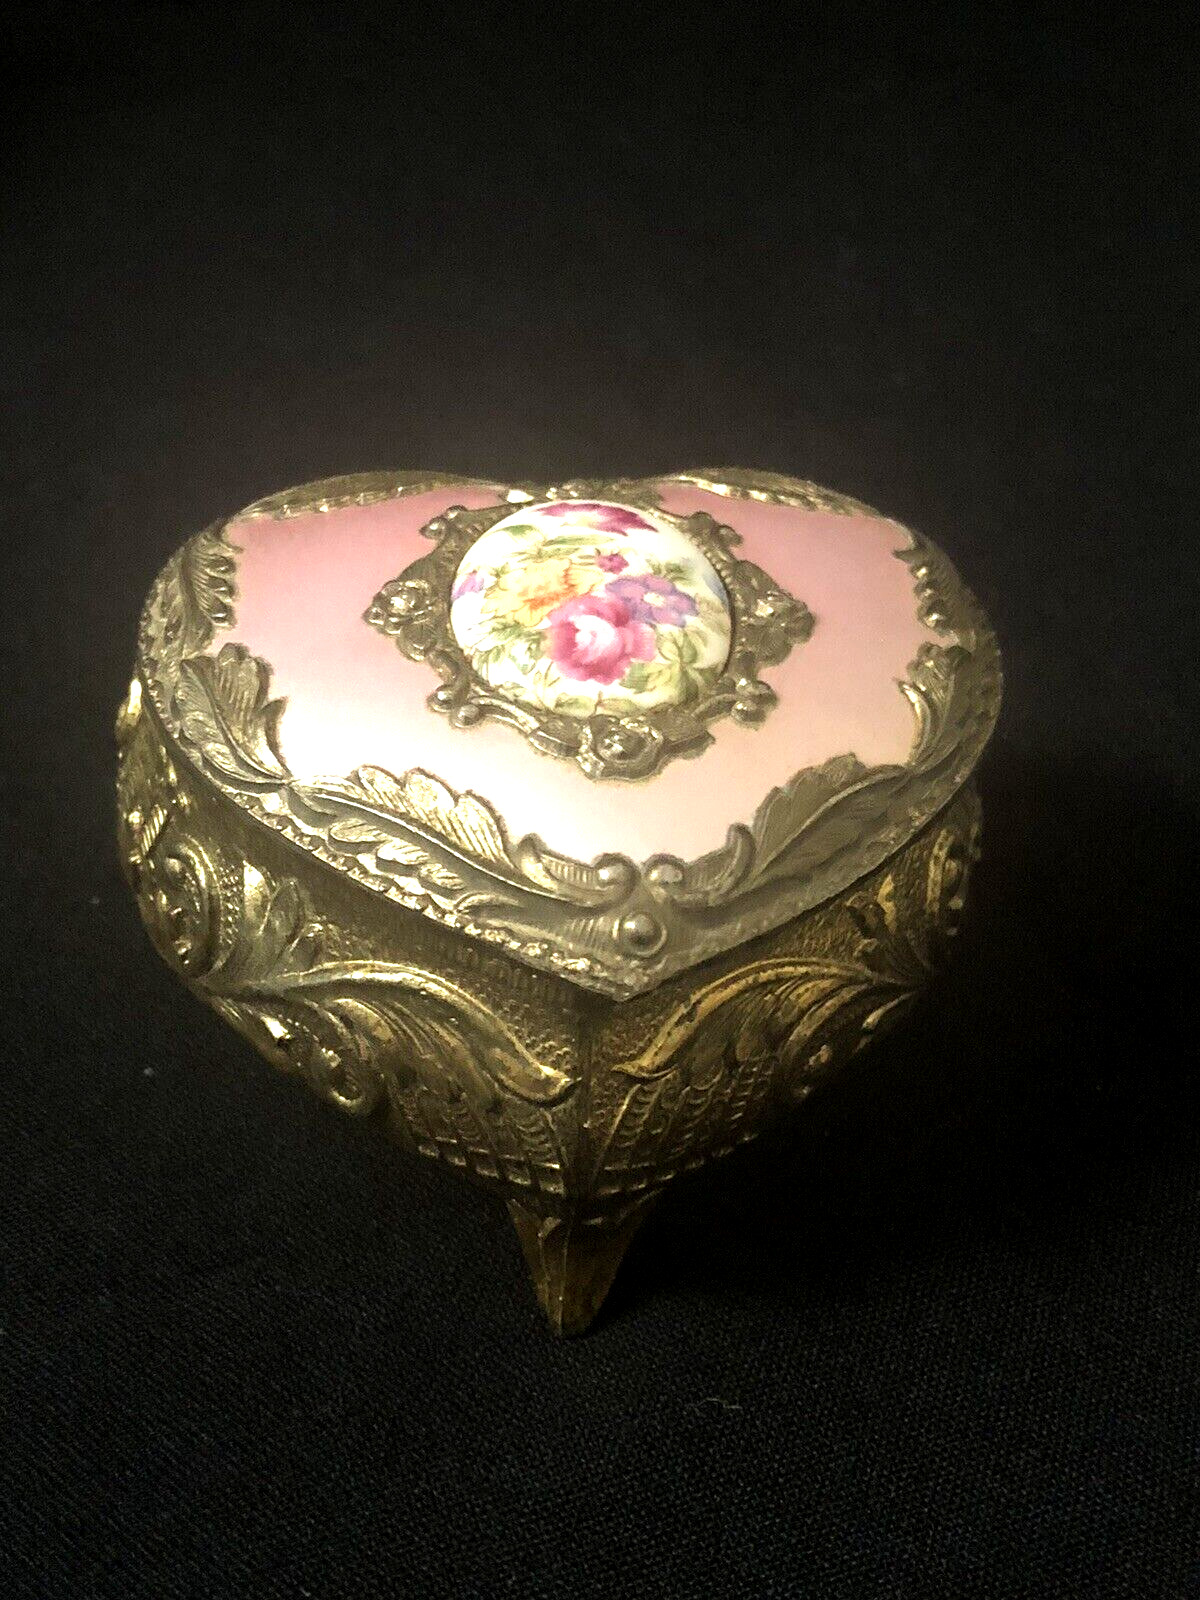 Vintage heart shaped trinket box w/faux floral cameo Gold tone & Pink top